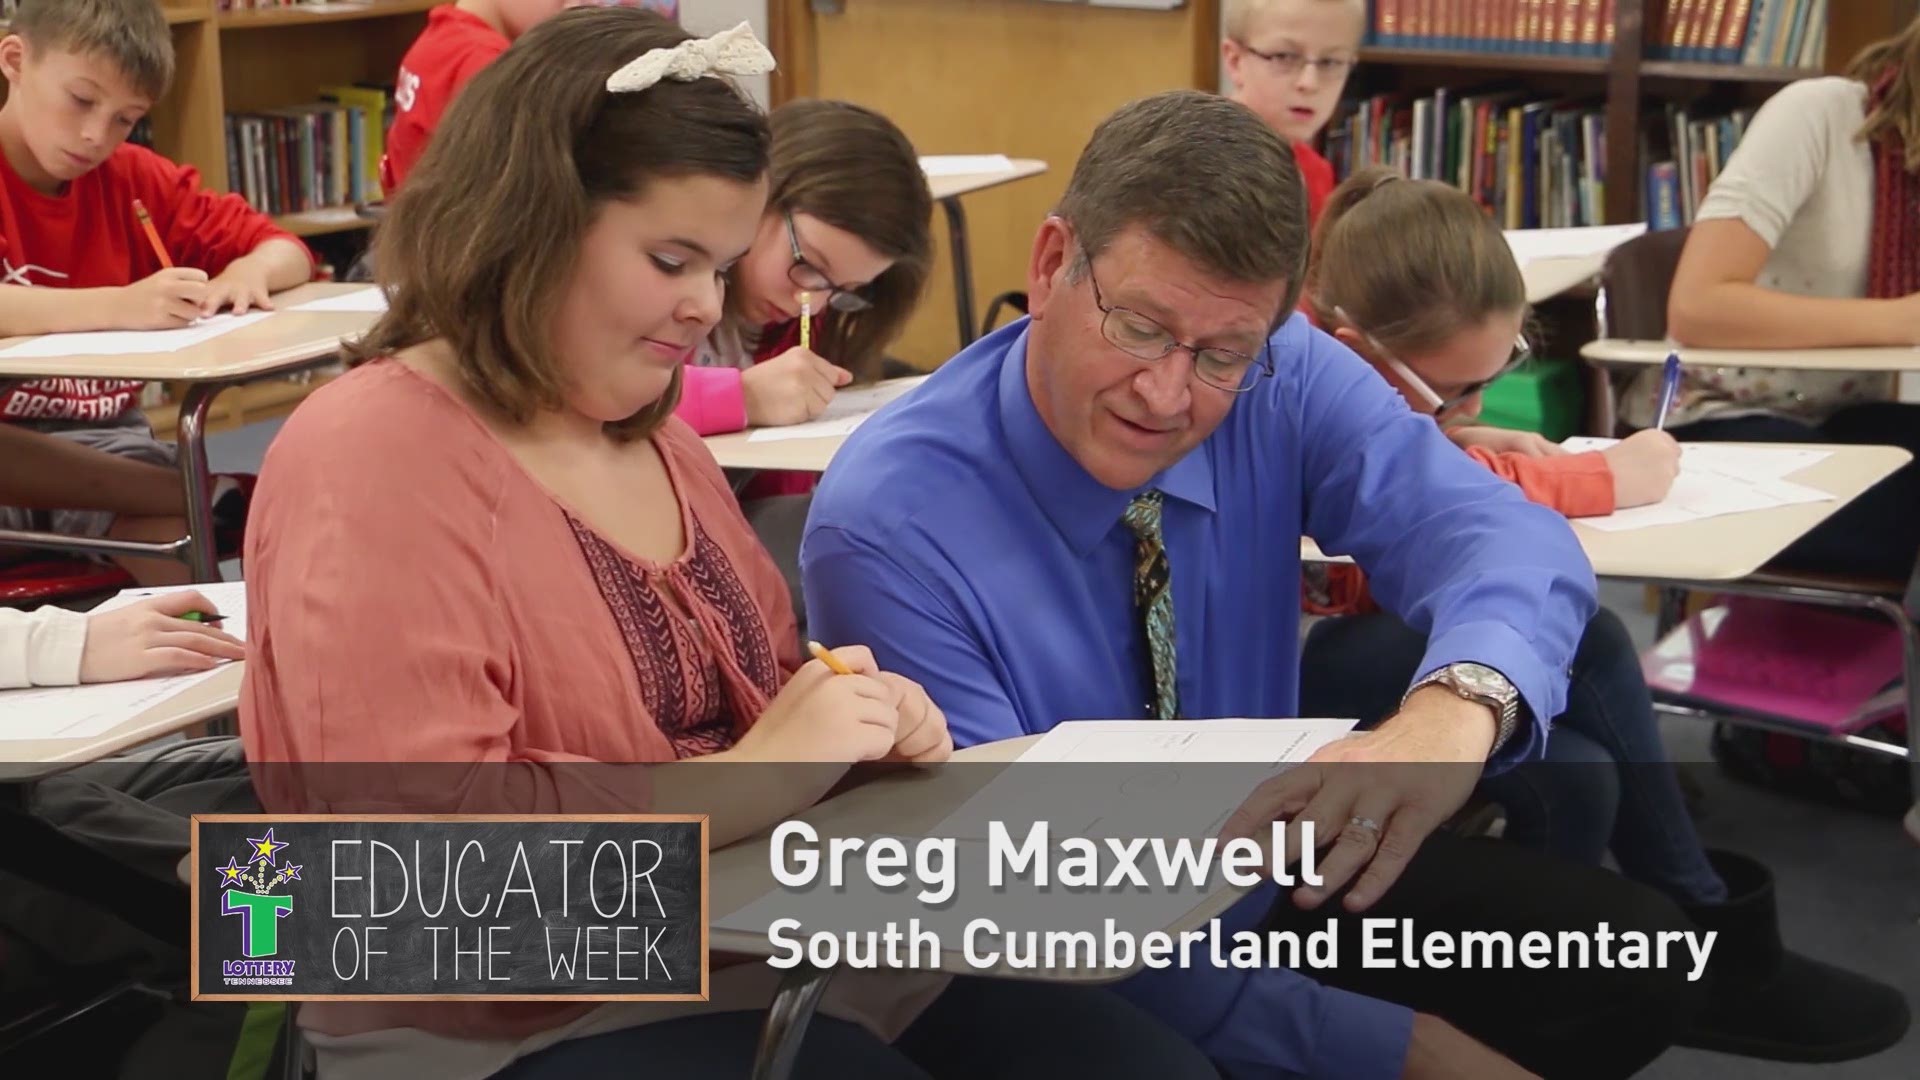 The Educator of the Week 11/7 is Greg Maxwell